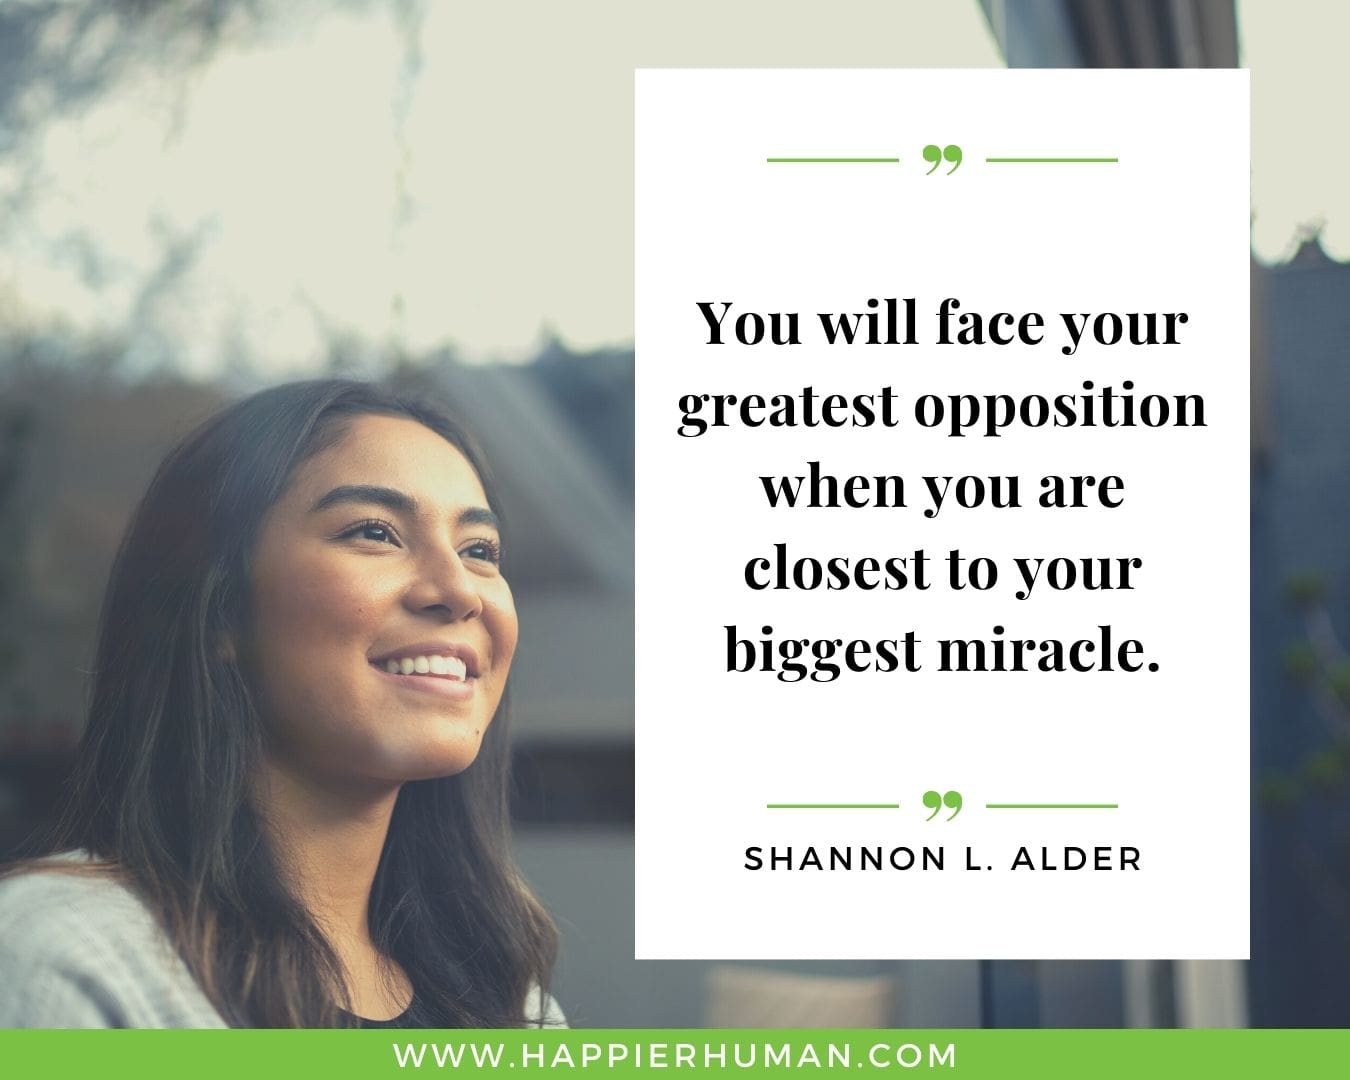 Haters Quotes - “You will face your greatest opposition when you are closest to your biggest miracle.” - Shannon L. Alder